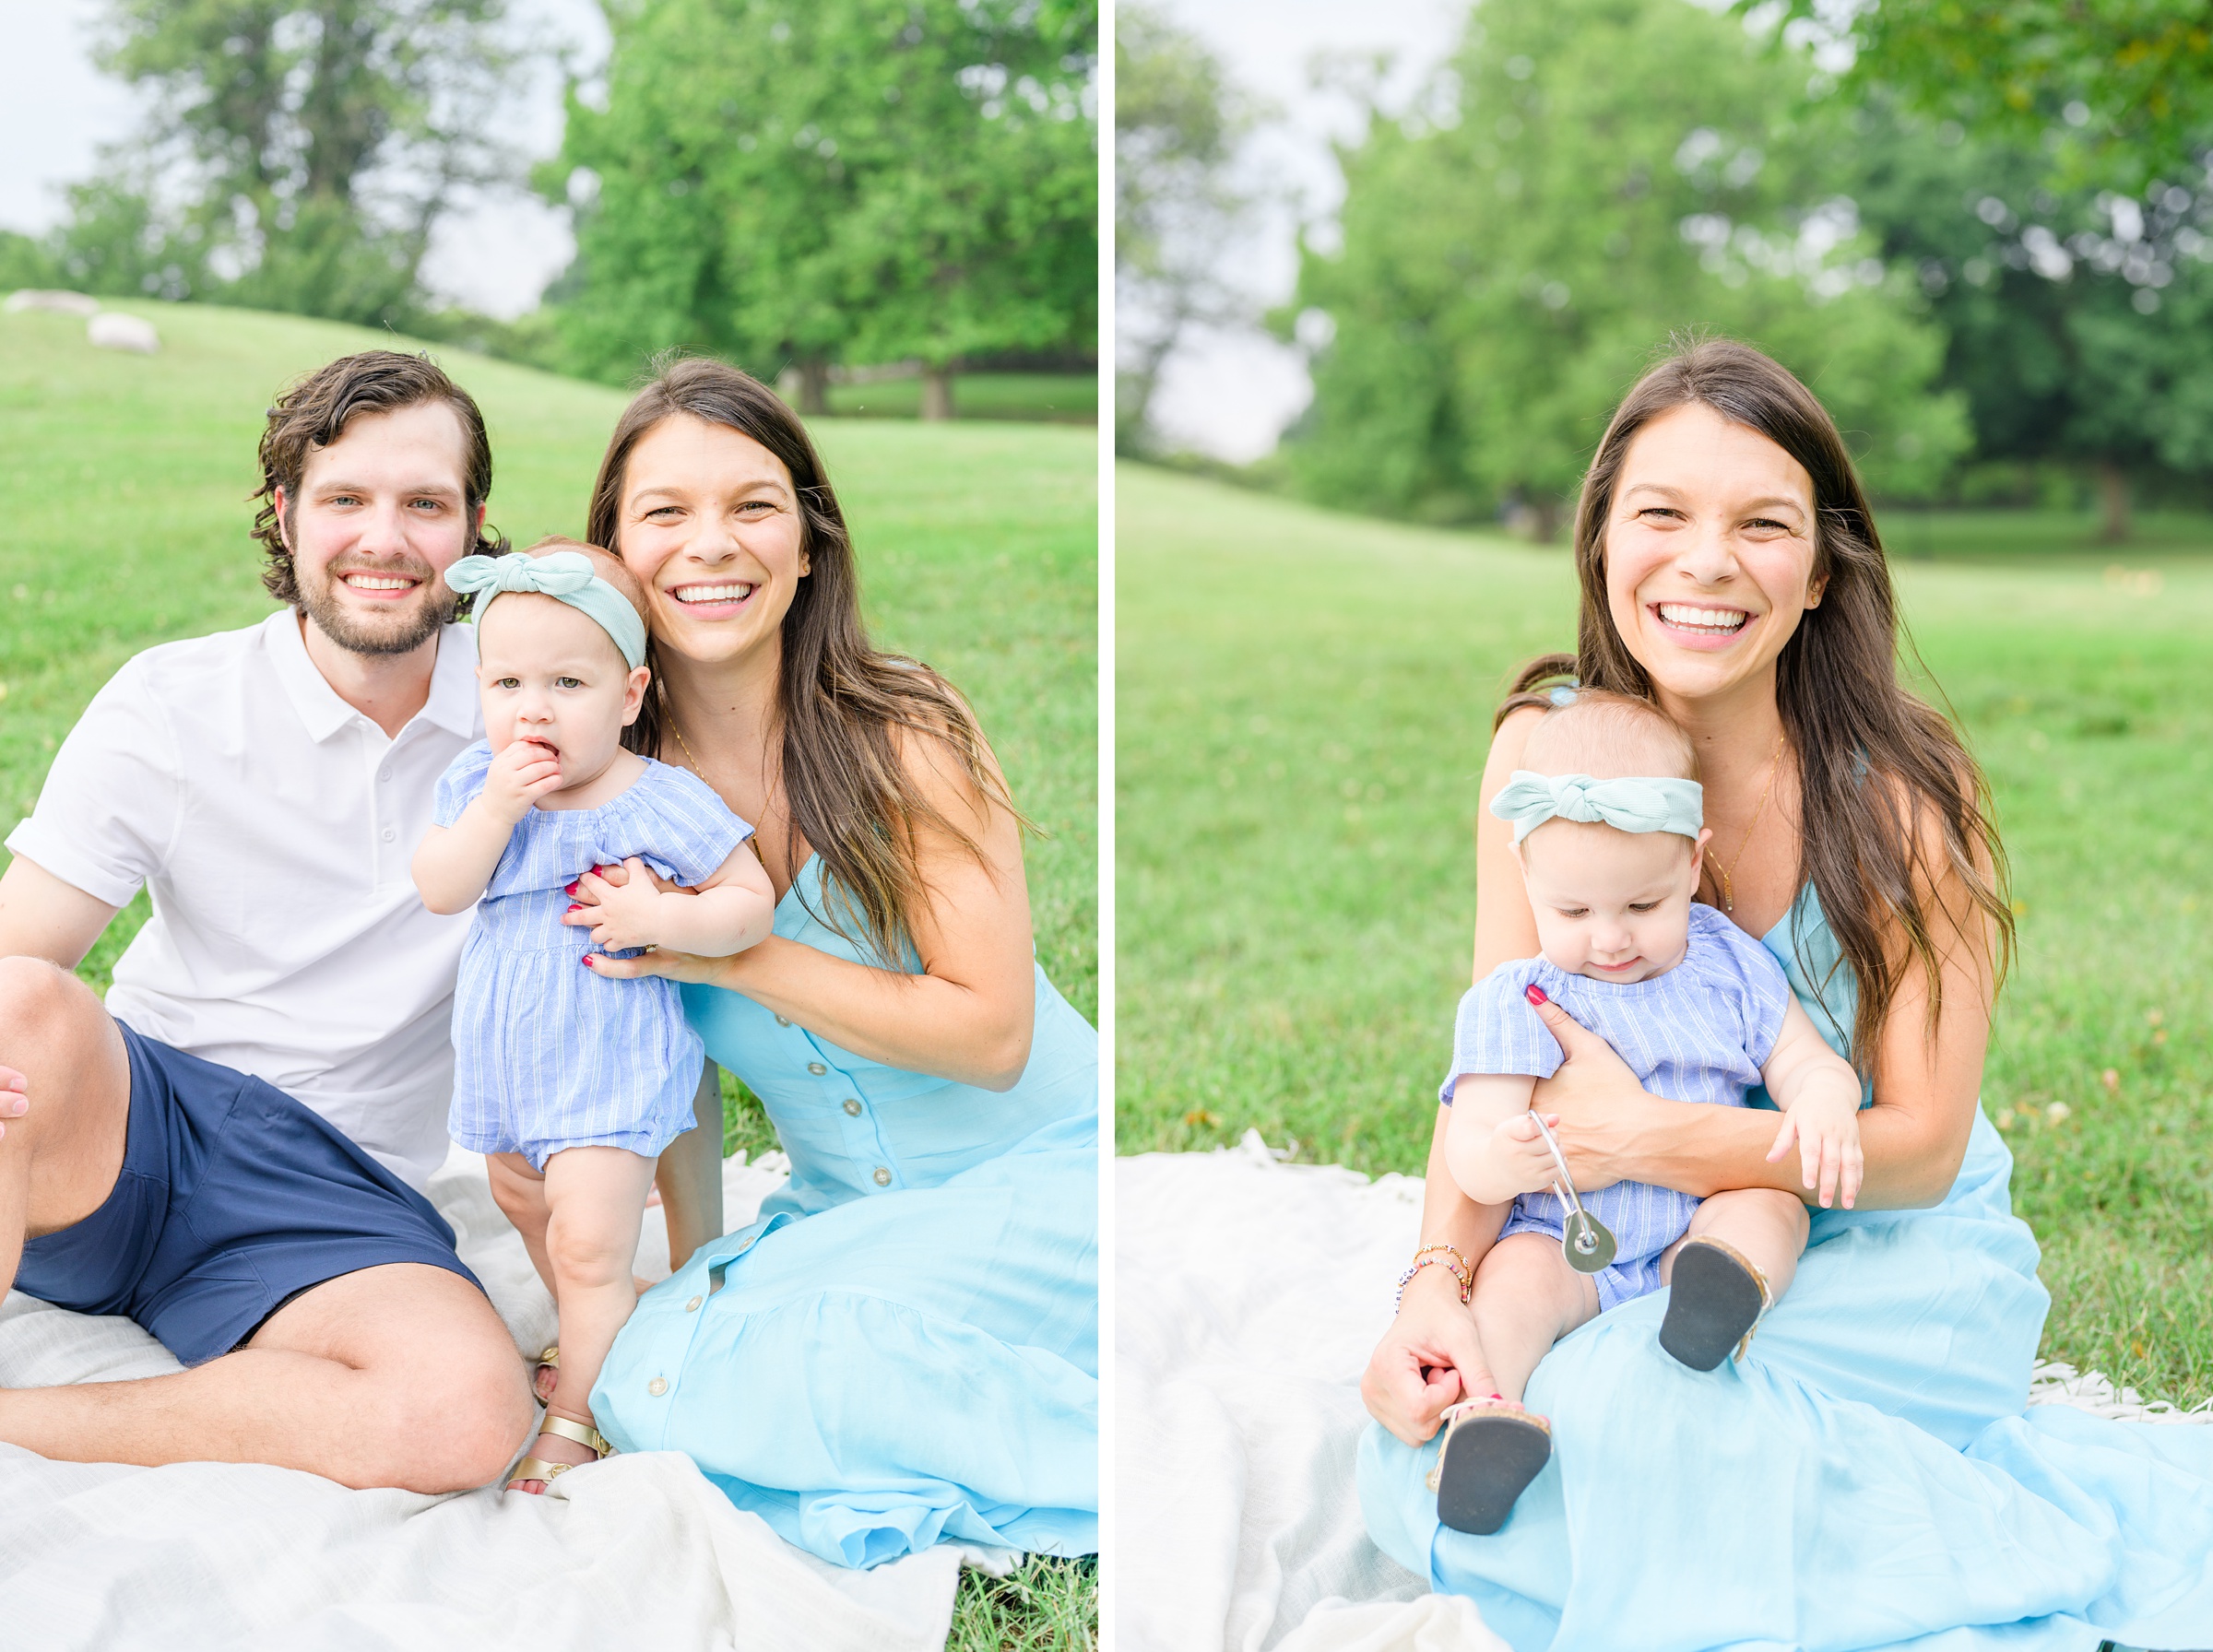 1st Birthday and Family Portrait Session at Patterson Park in Baltimore, Maryland. Photographed by Baltimore Family Milestone Photographer Cait Kramer.